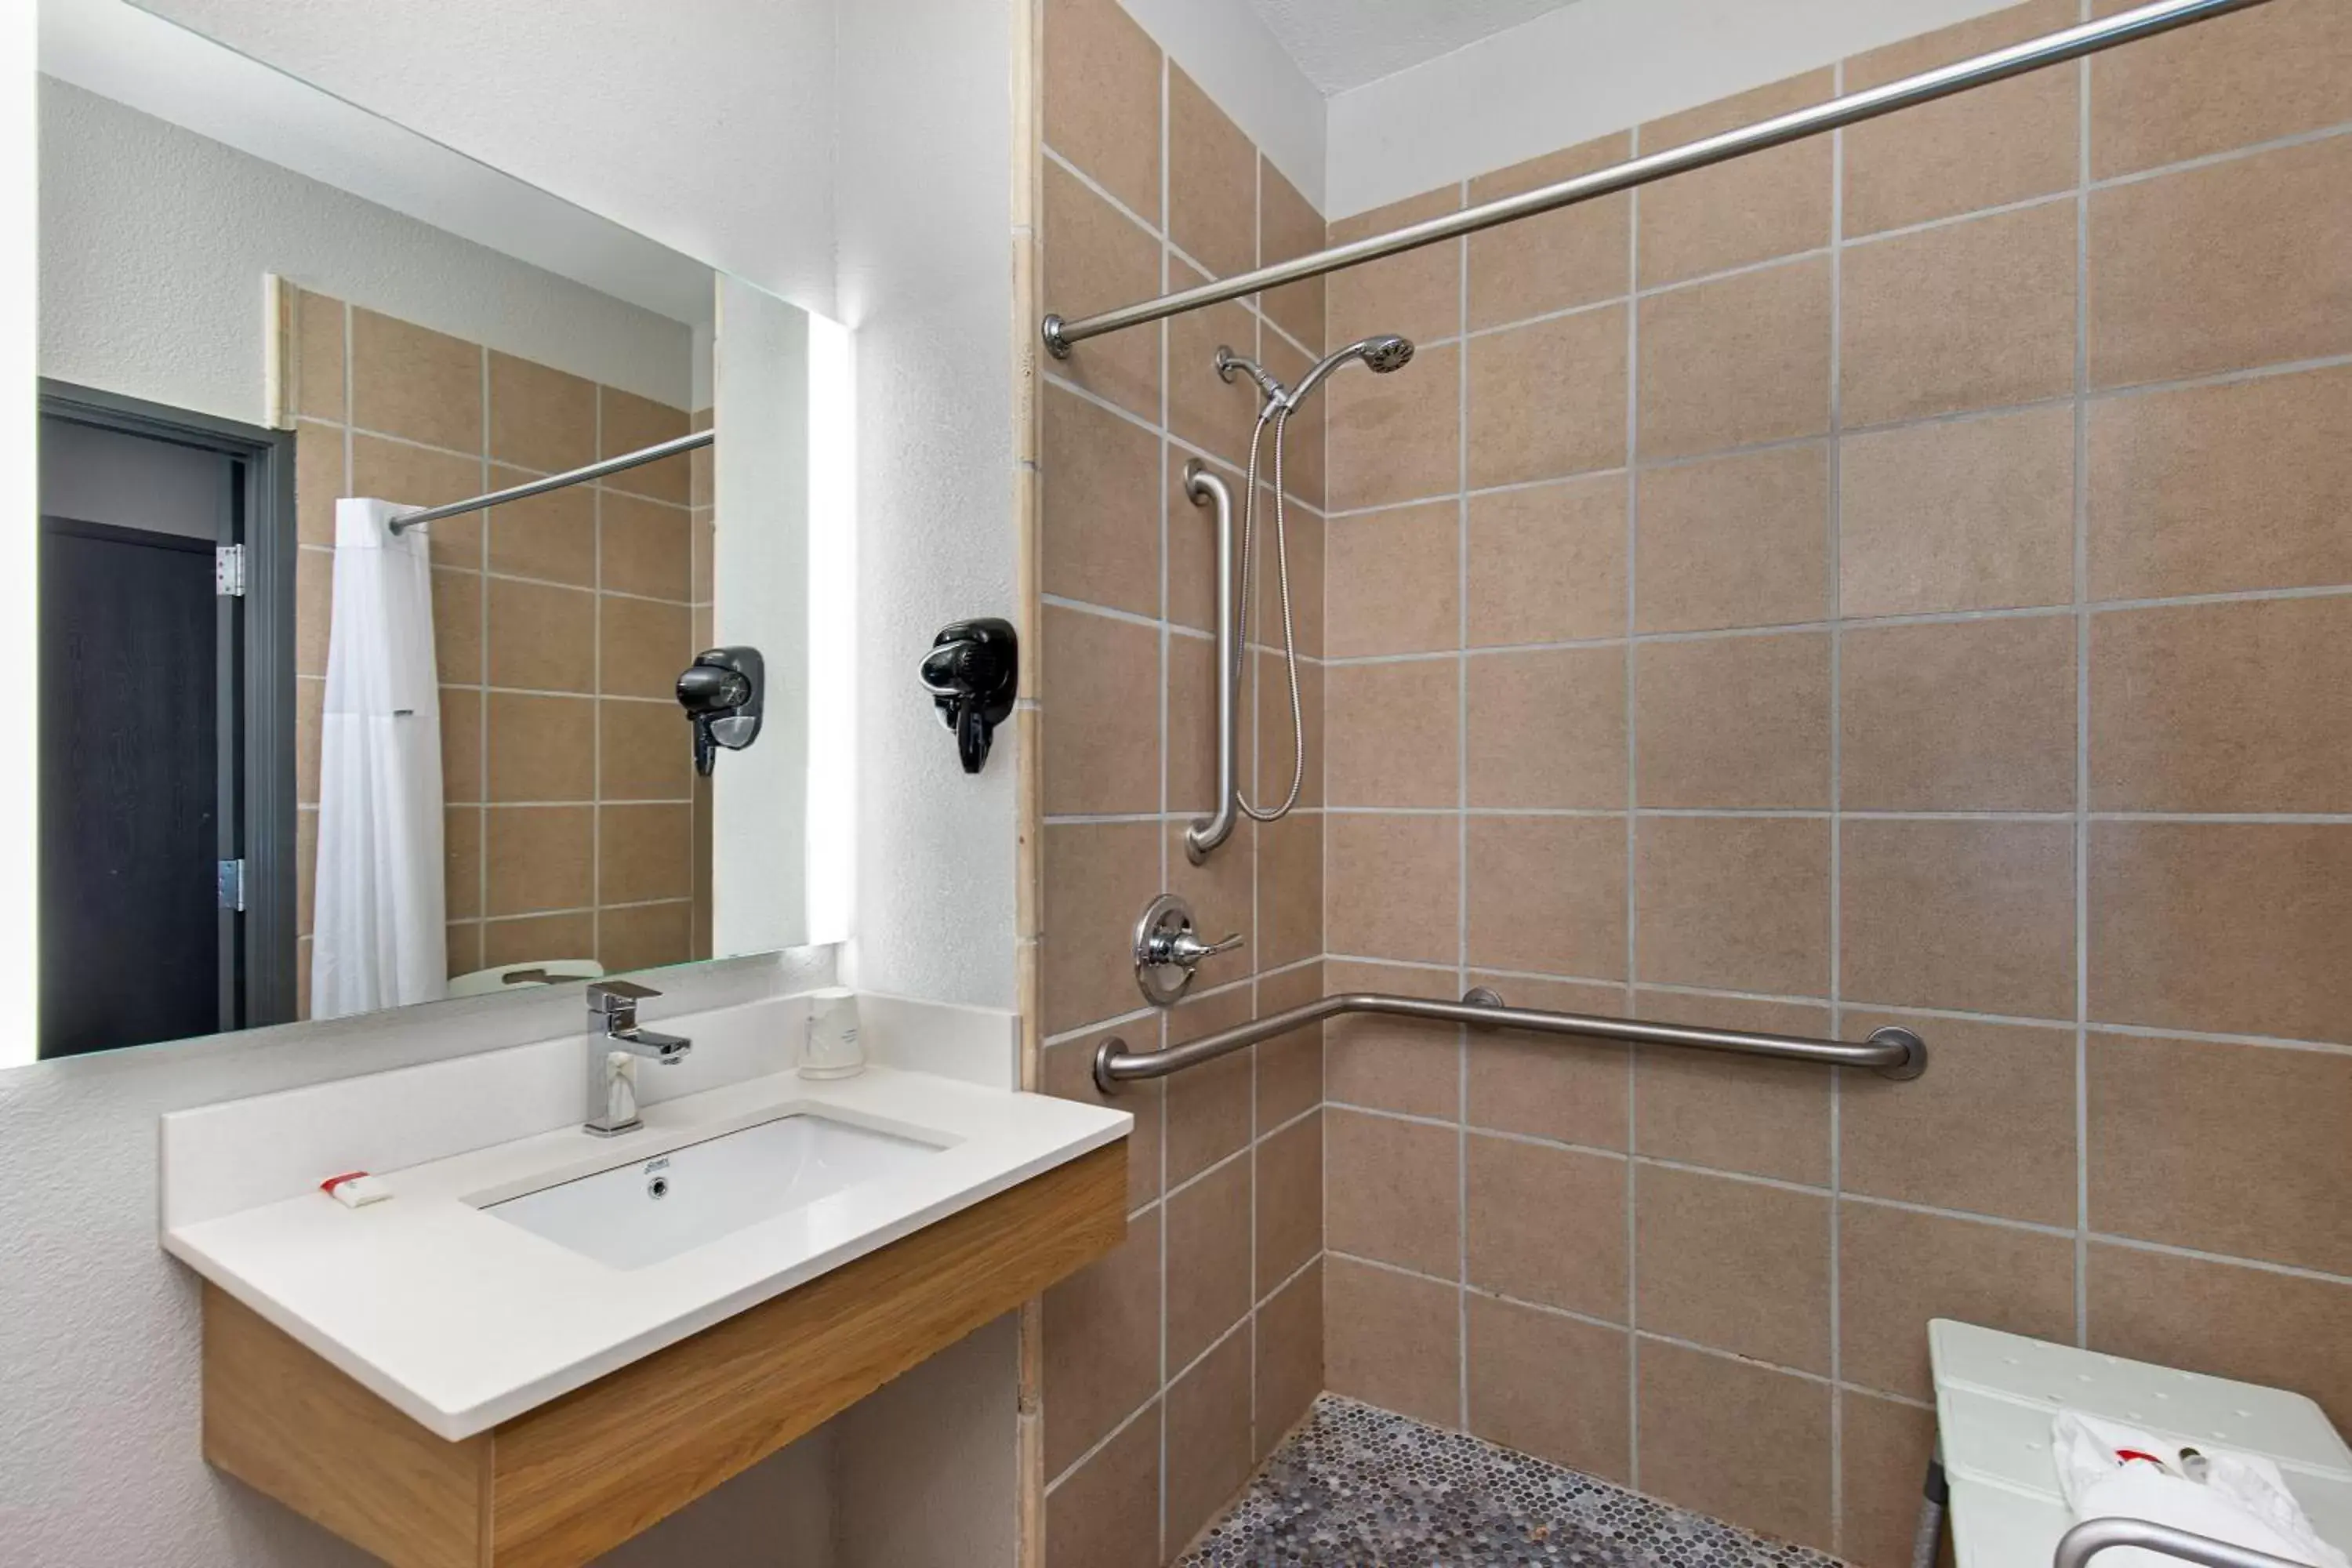 Bathroom in Microtel Inn & Suites by Wyndham Manchester - Newly Renovated